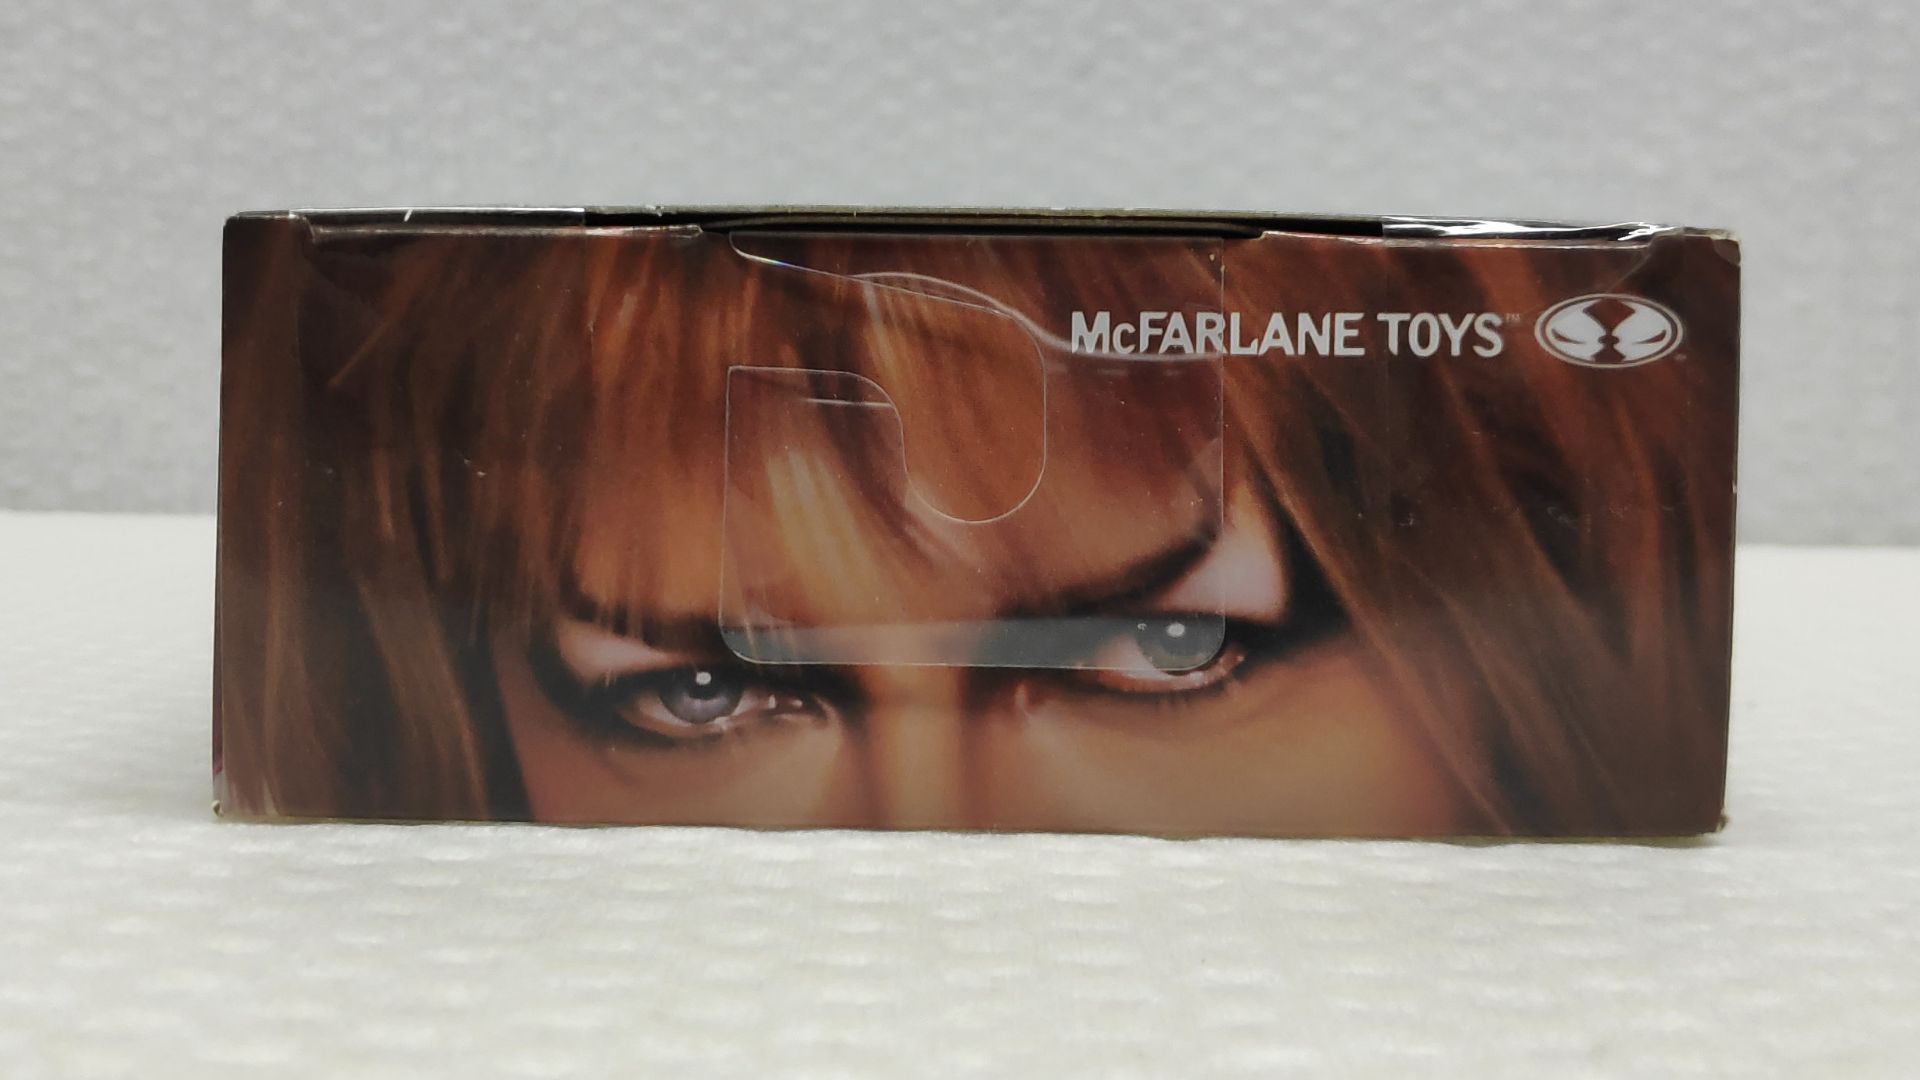 1 x David Bowie Dance Magic Jareth Action Figure From Labyrinth - McFarlane Toys - New/Boxed - HTYS1 - Image 4 of 10